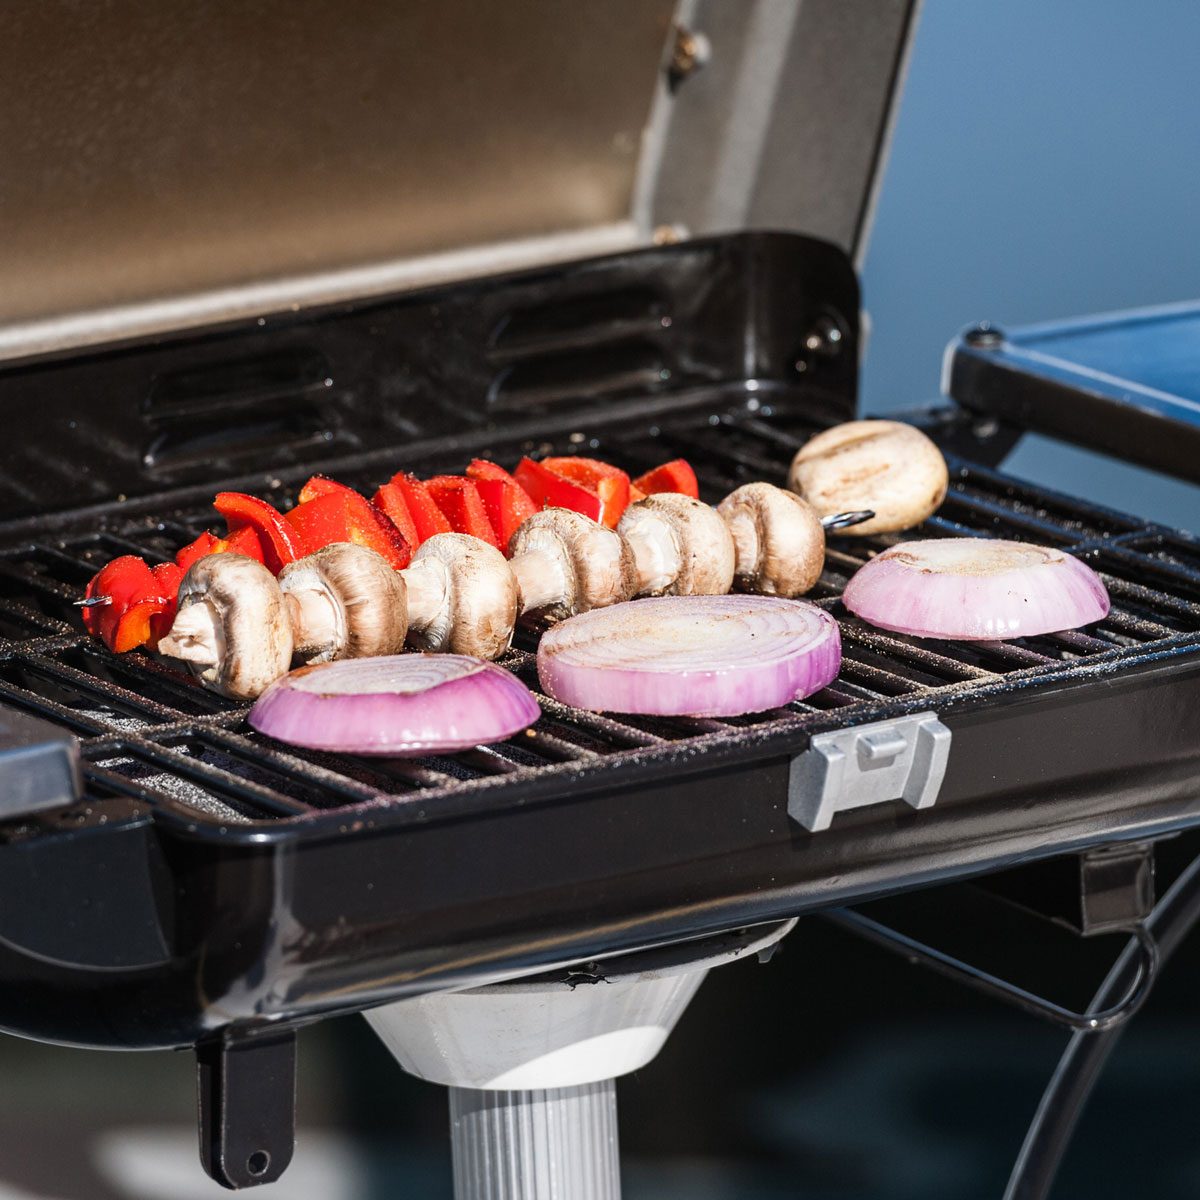 https://www.familyhandyman.com/wp-content/uploads/2020/07/electric-grill0GettyImages-998808750.jpg?fit=696%2C696